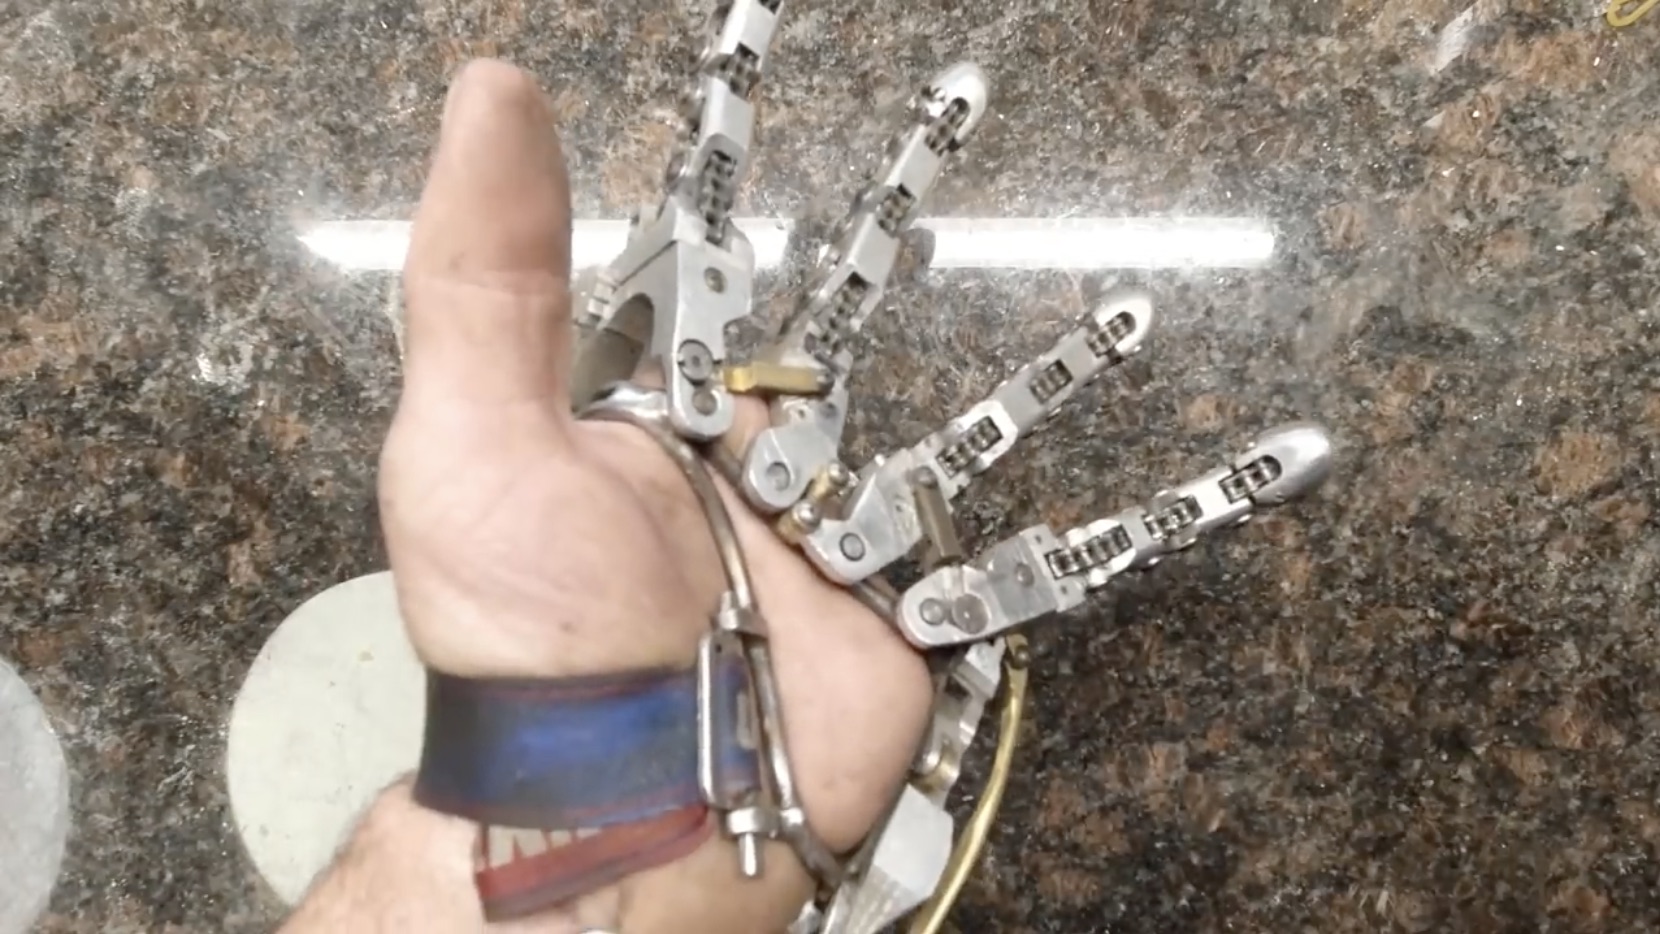 Best of 2020: This Guy Built His Own Prosthetic Hand Setup With Aluminum!